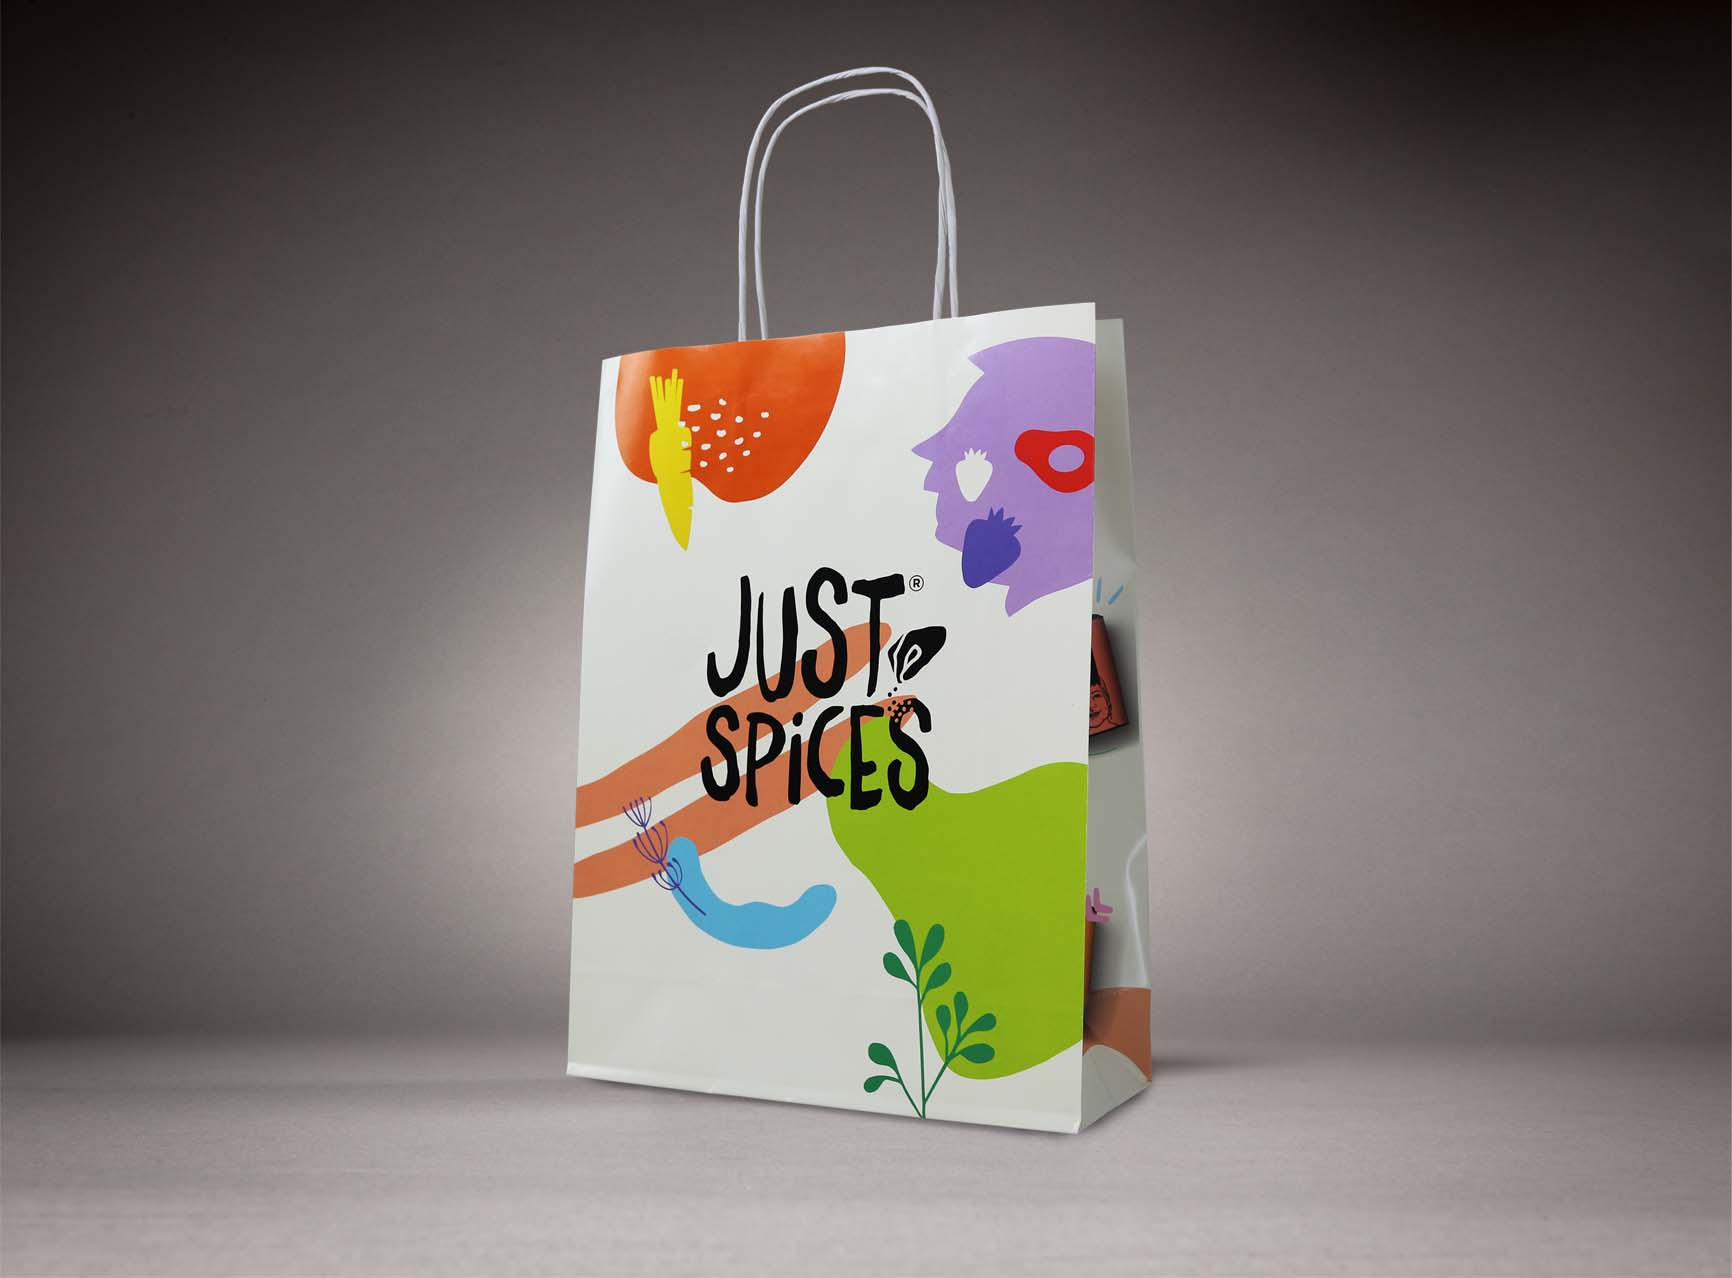 Printed paper bag with paper cord, Jus Spices motif